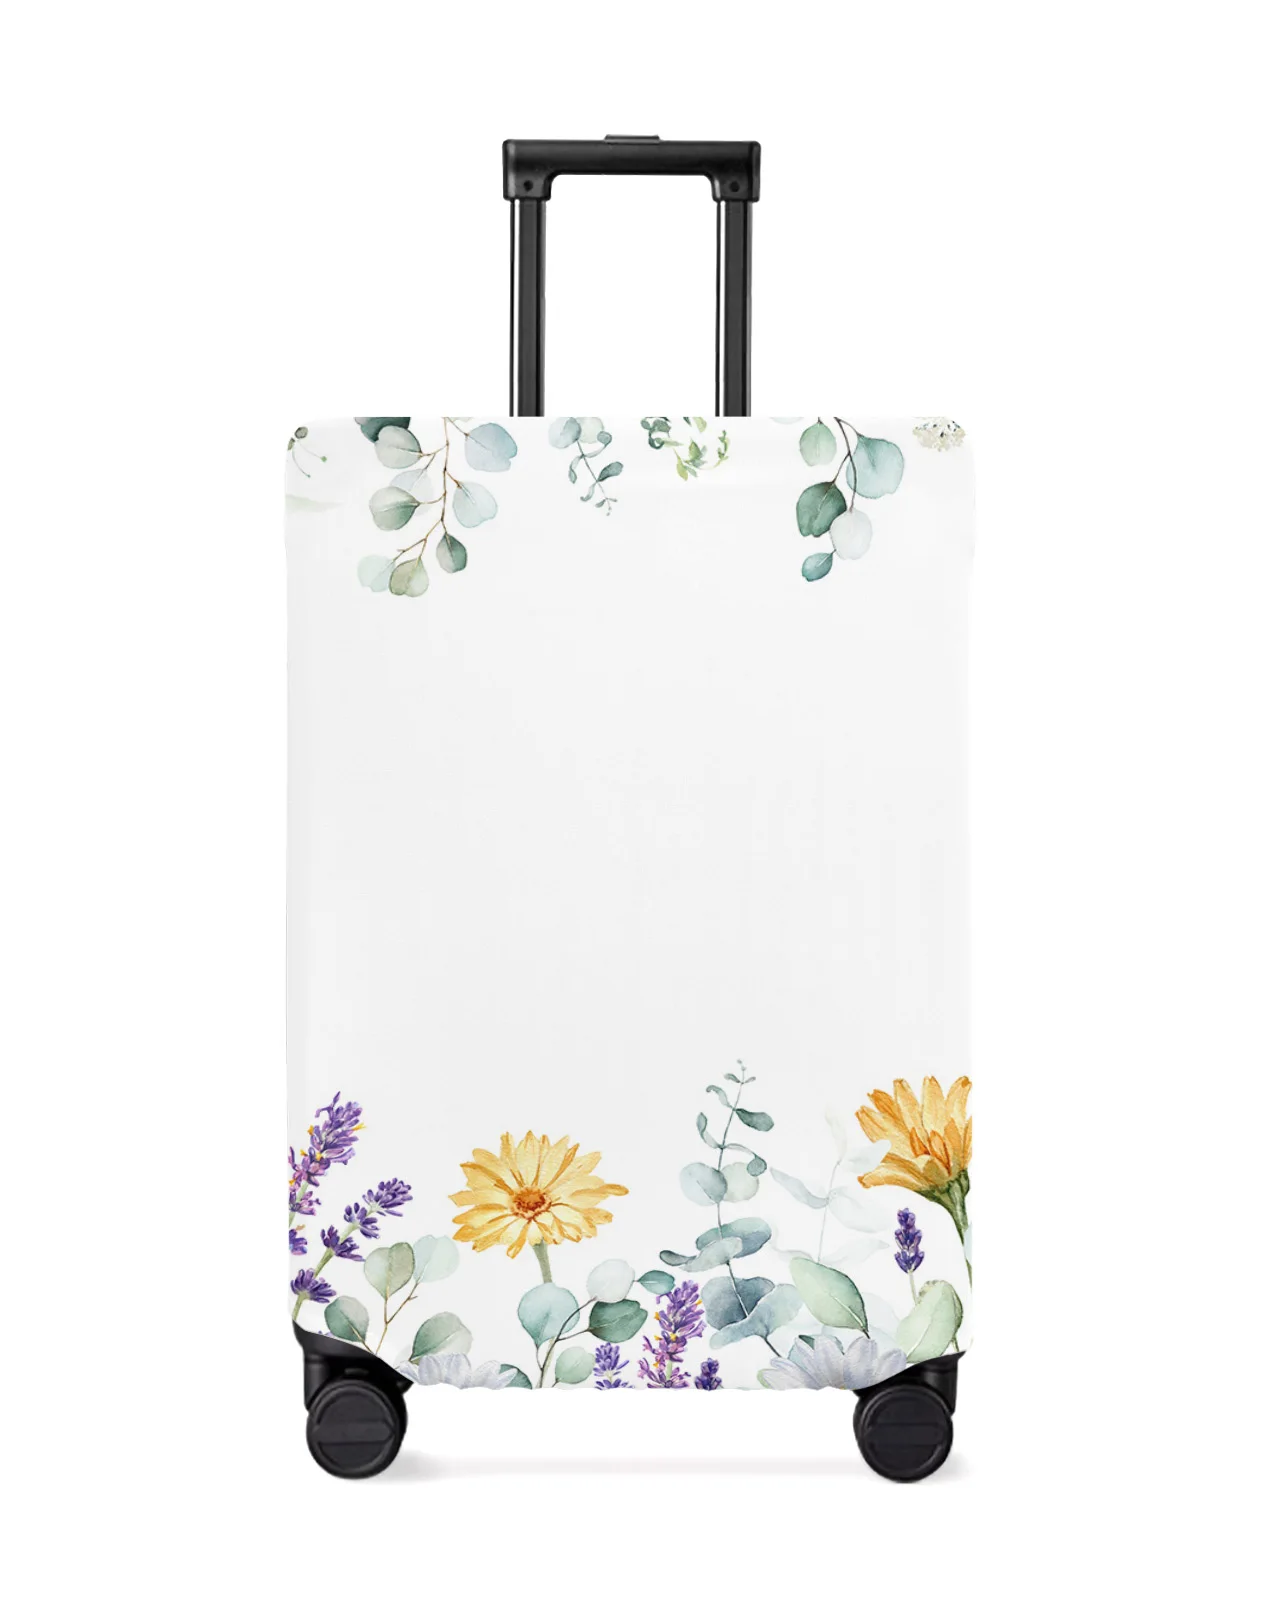 idyllic-eucalyptus-daisy-lavender-butterfly-luggage-cover-stretch-baggage-dust-cover-for-18-32-inch-travel-suitcase-case